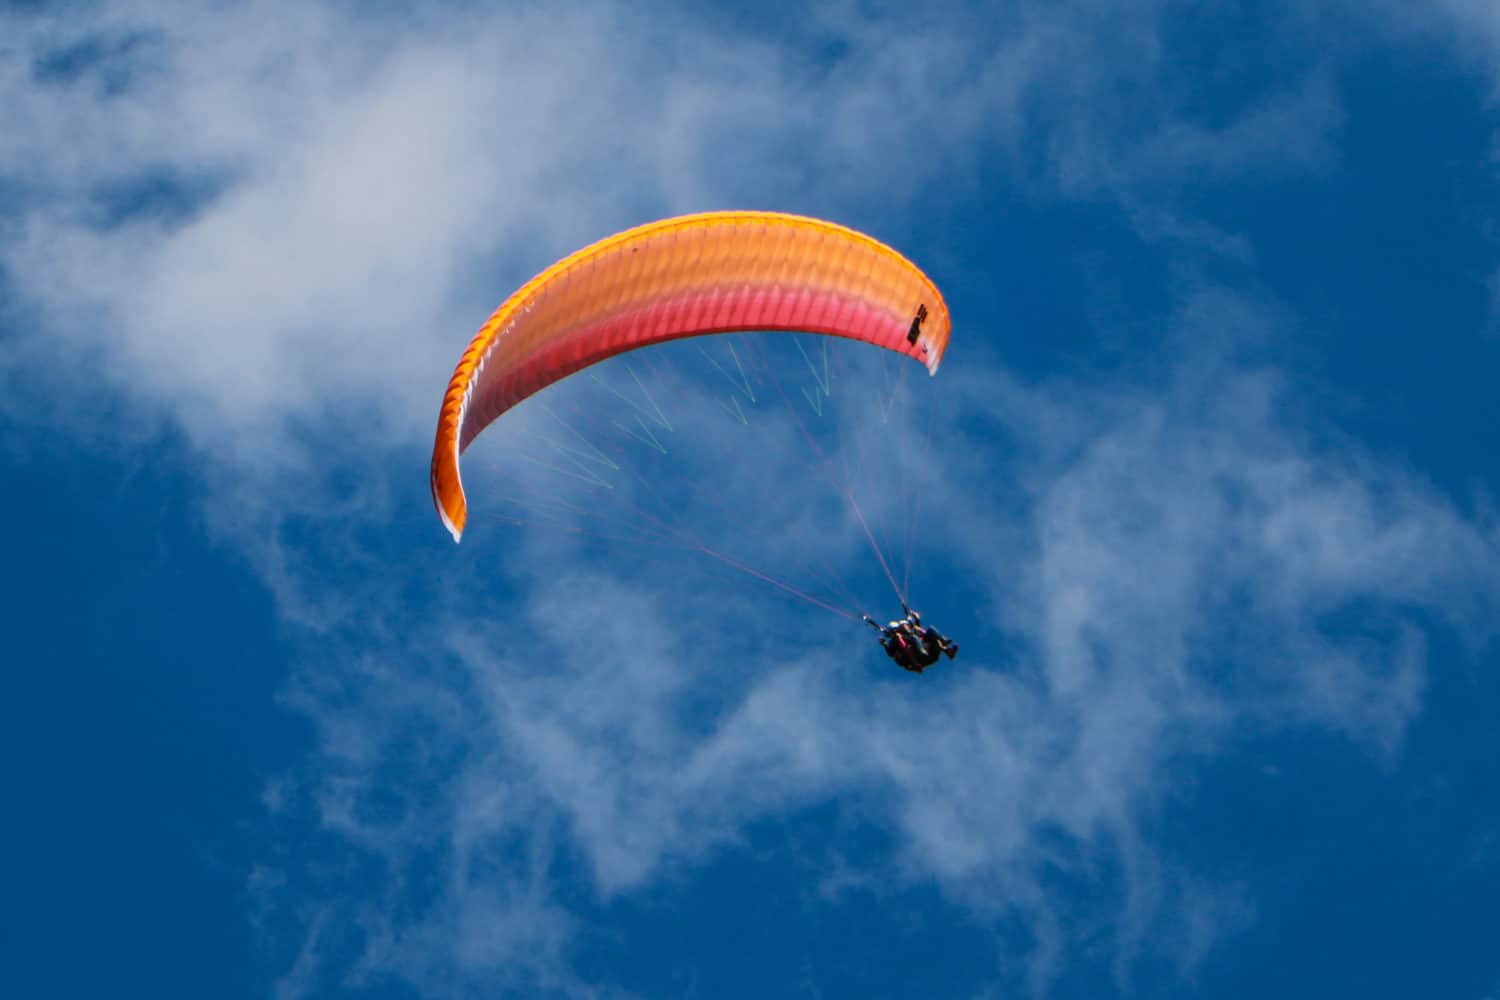 Paragliding in the sky with clouds behind